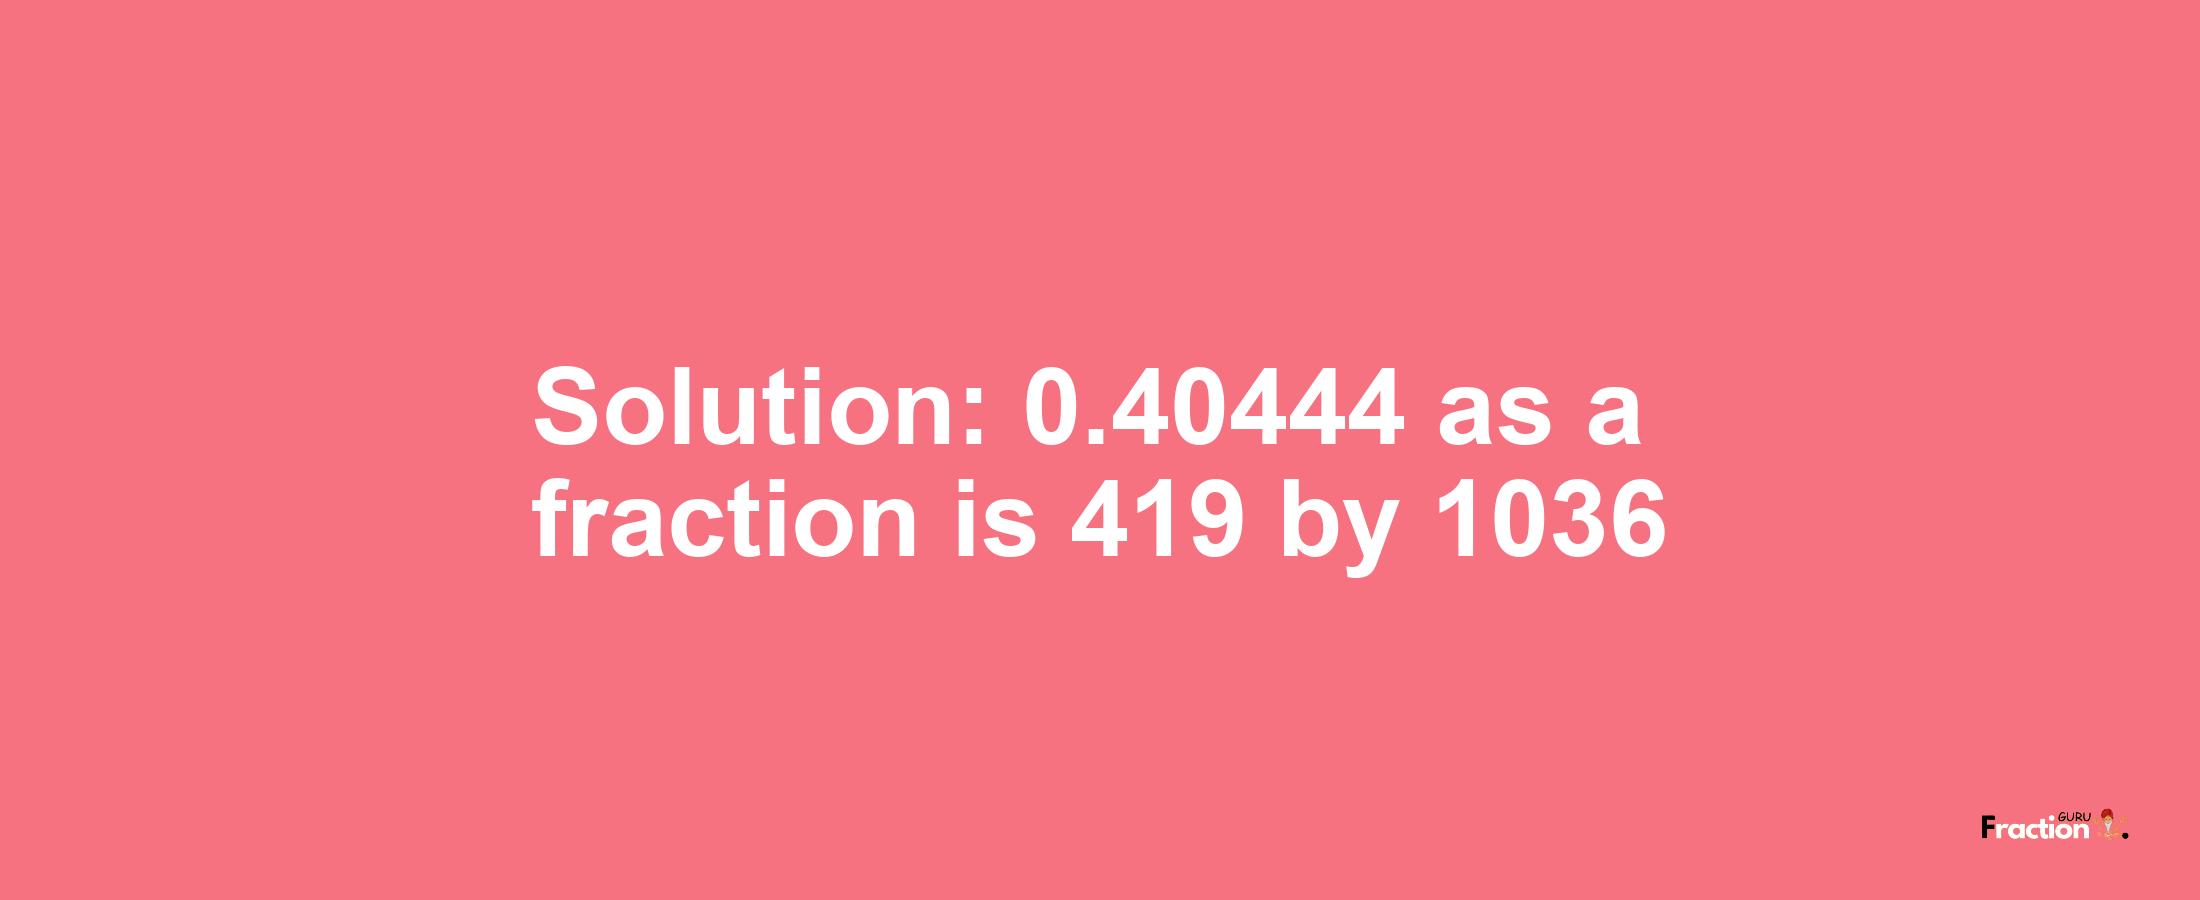 Solution:0.40444 as a fraction is 419/1036